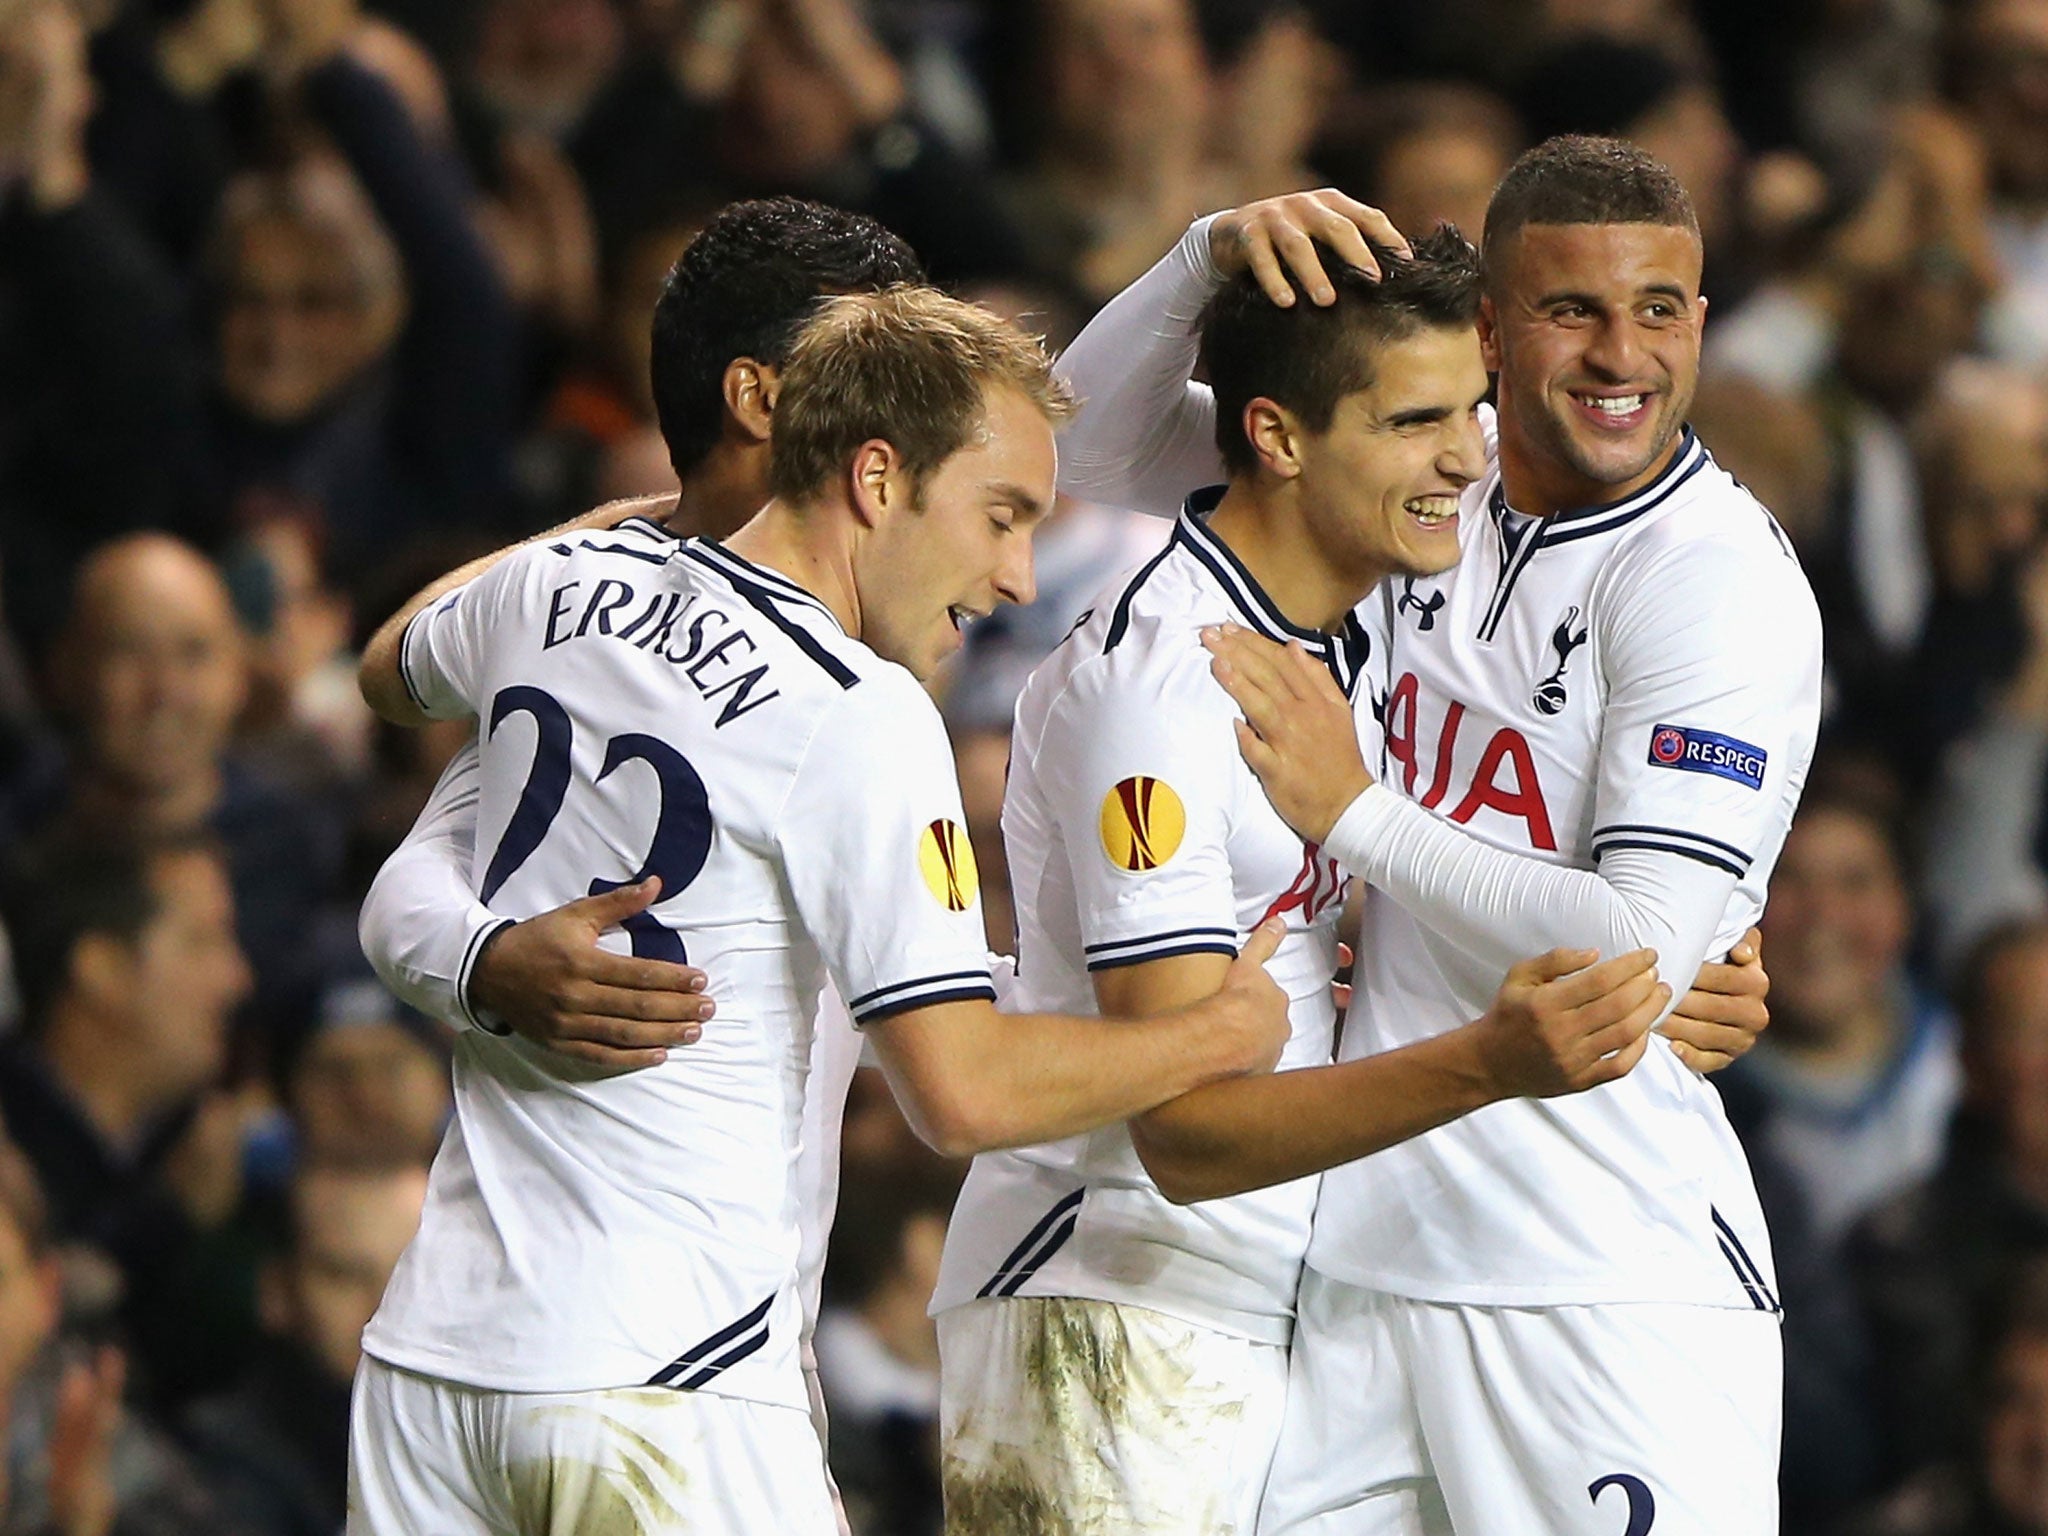 Erik Lamela, who scored the first and made the second, is mobbed